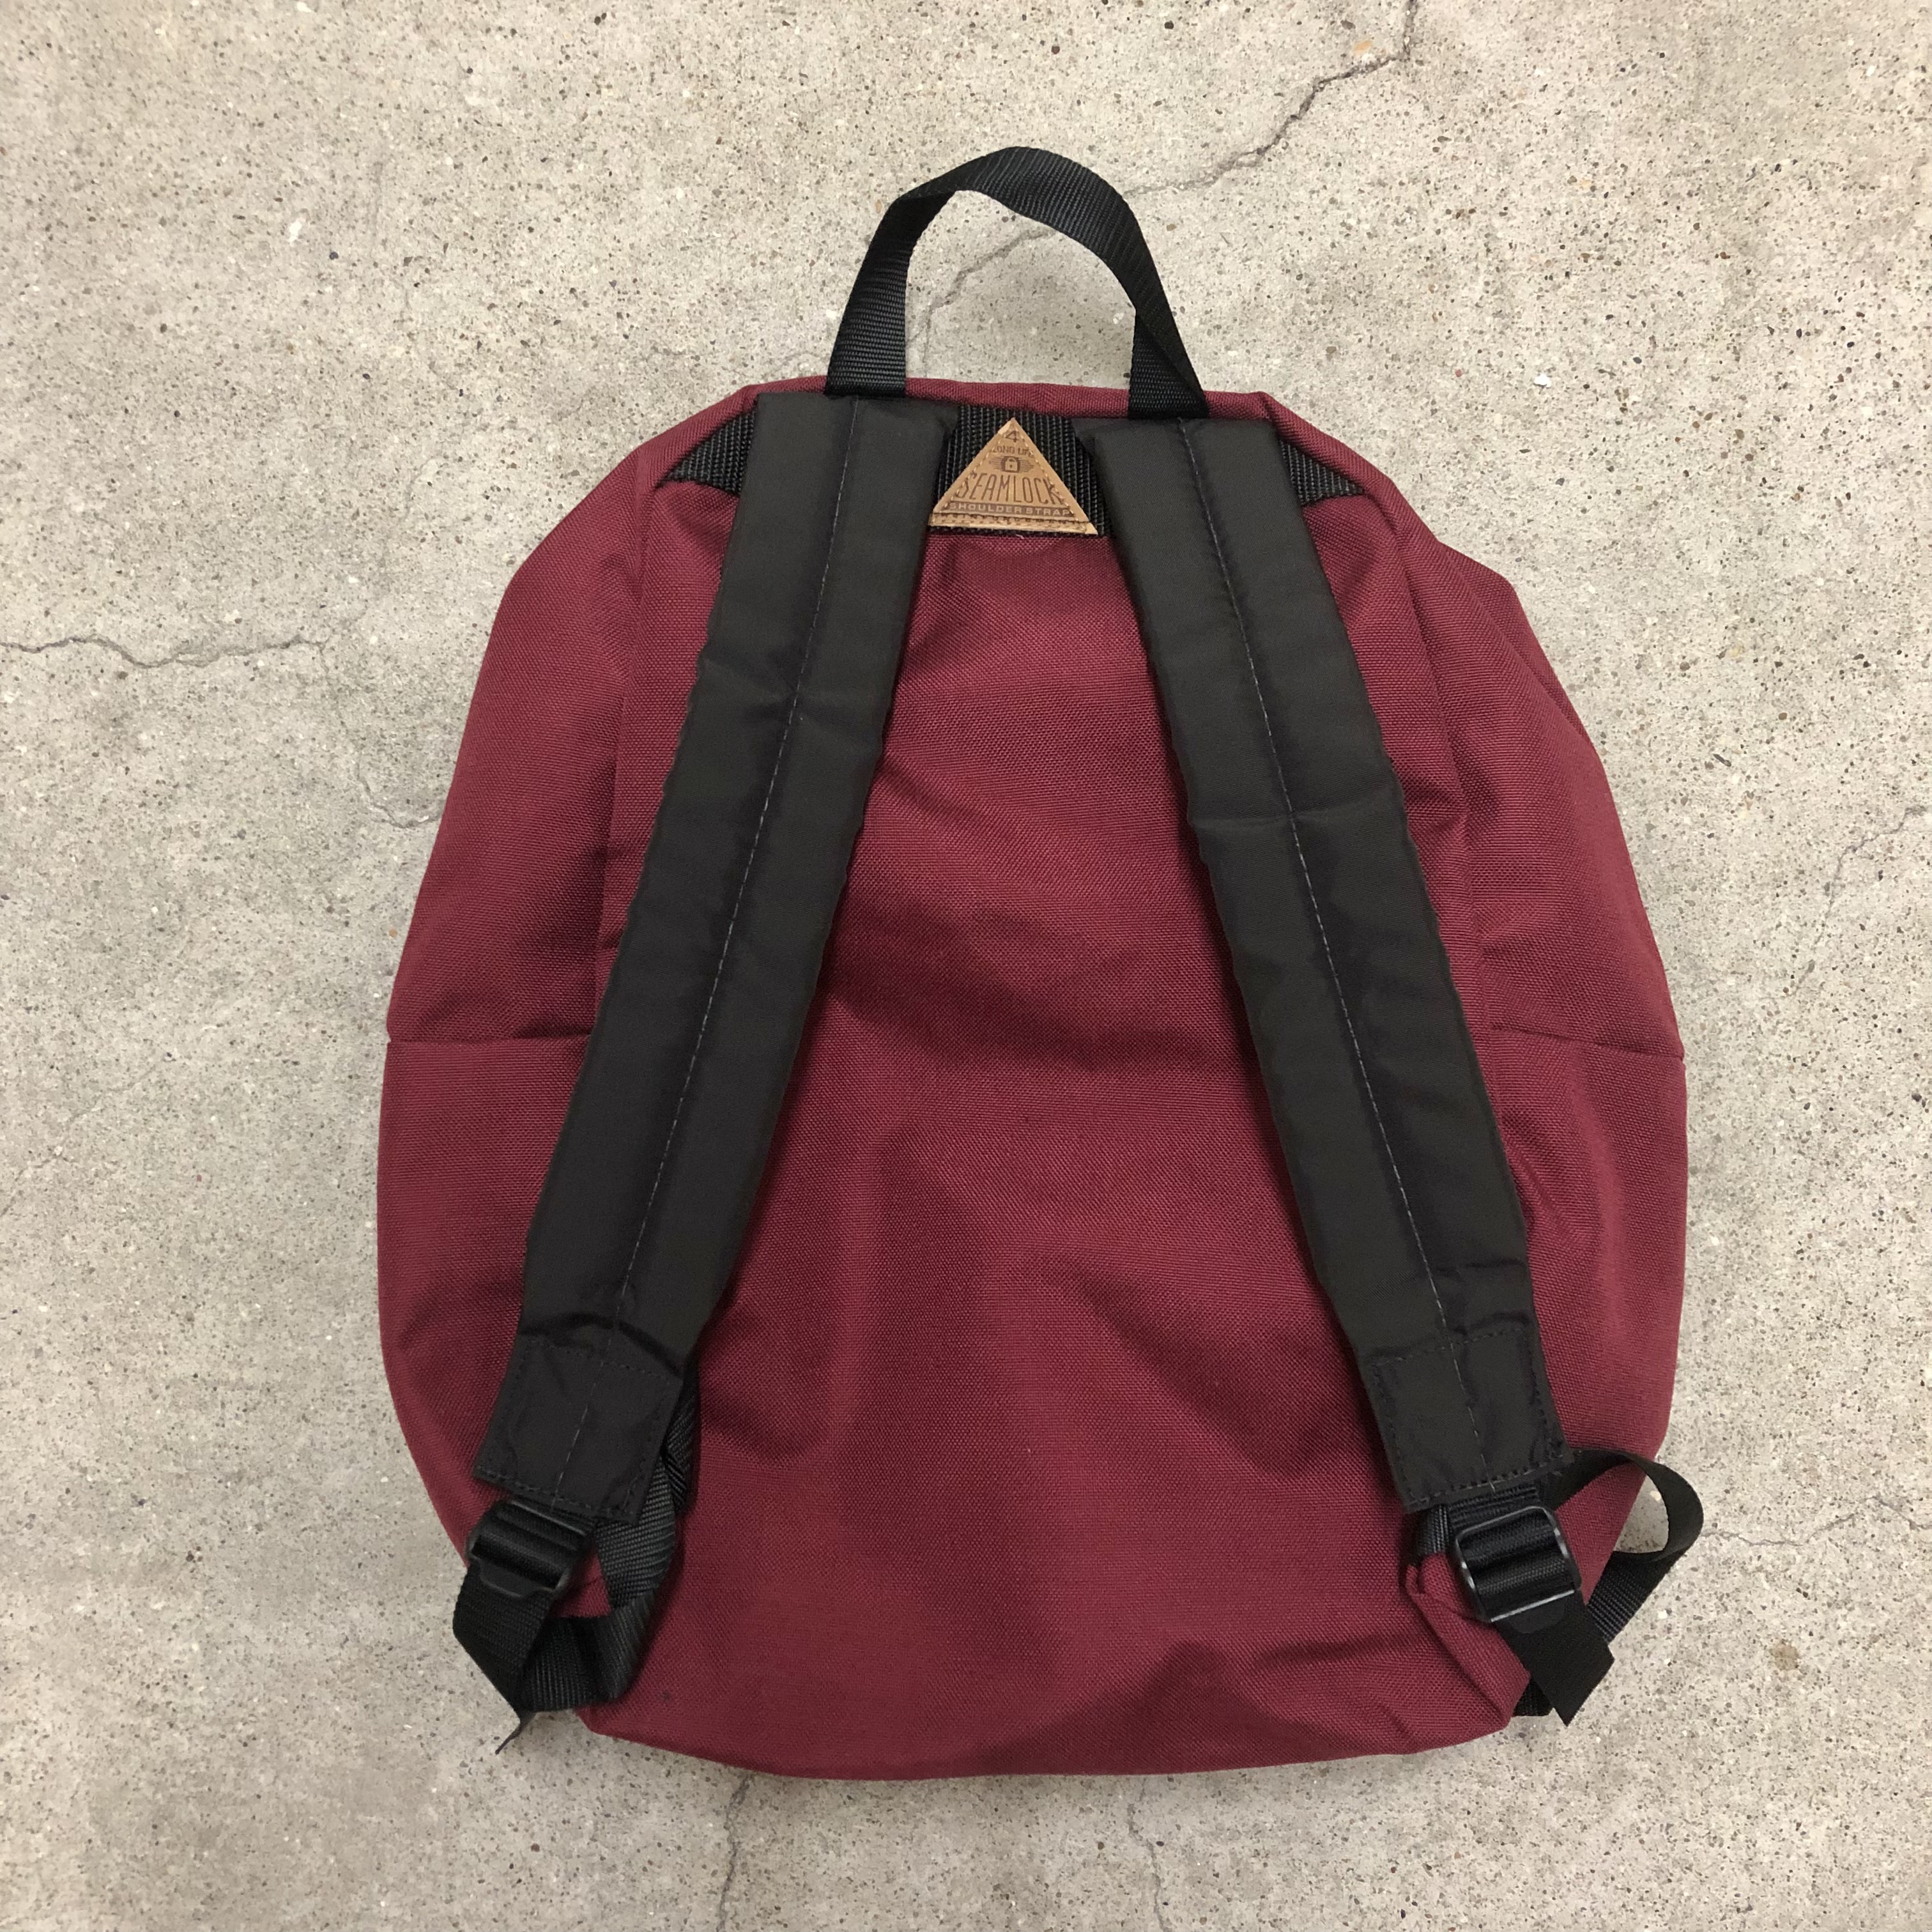 90s outdoorproducts Bagpack VINTAGE リュック